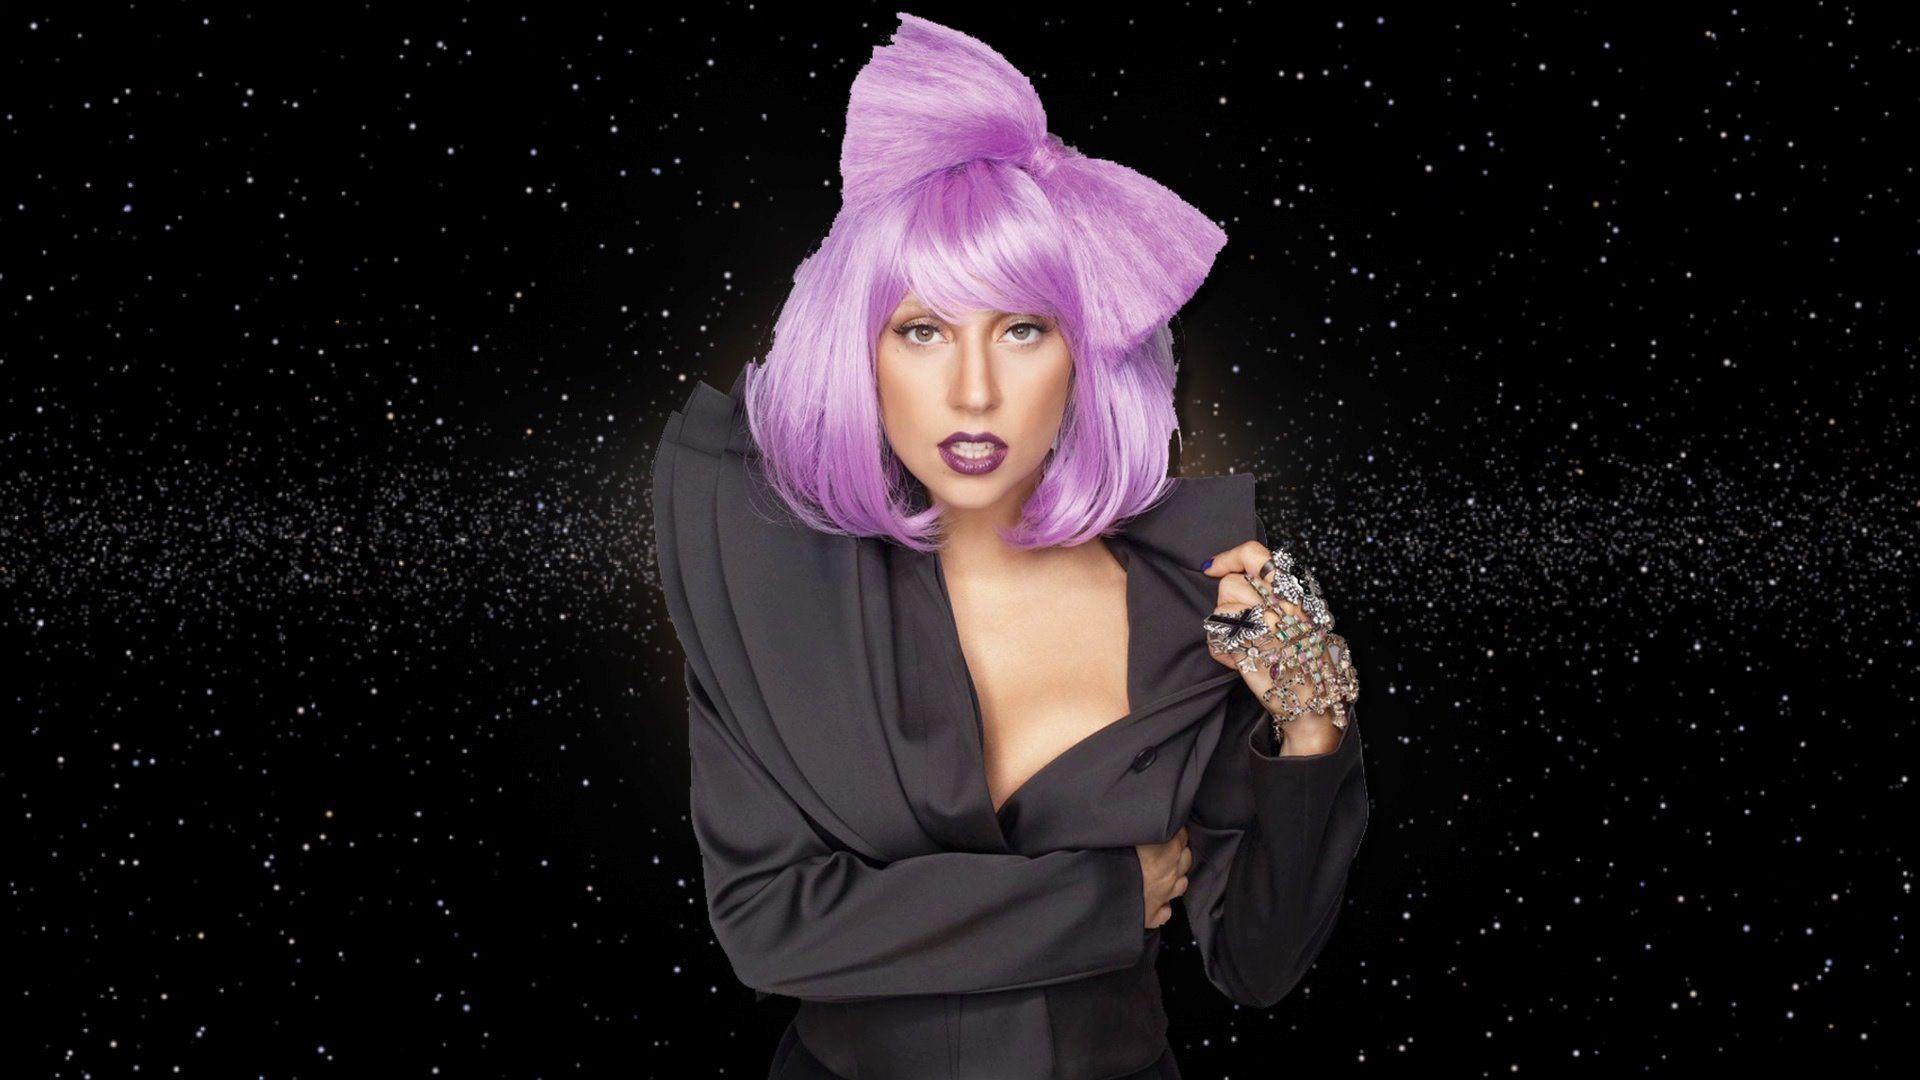 Lady Gaga wants to sing live from space in 2015